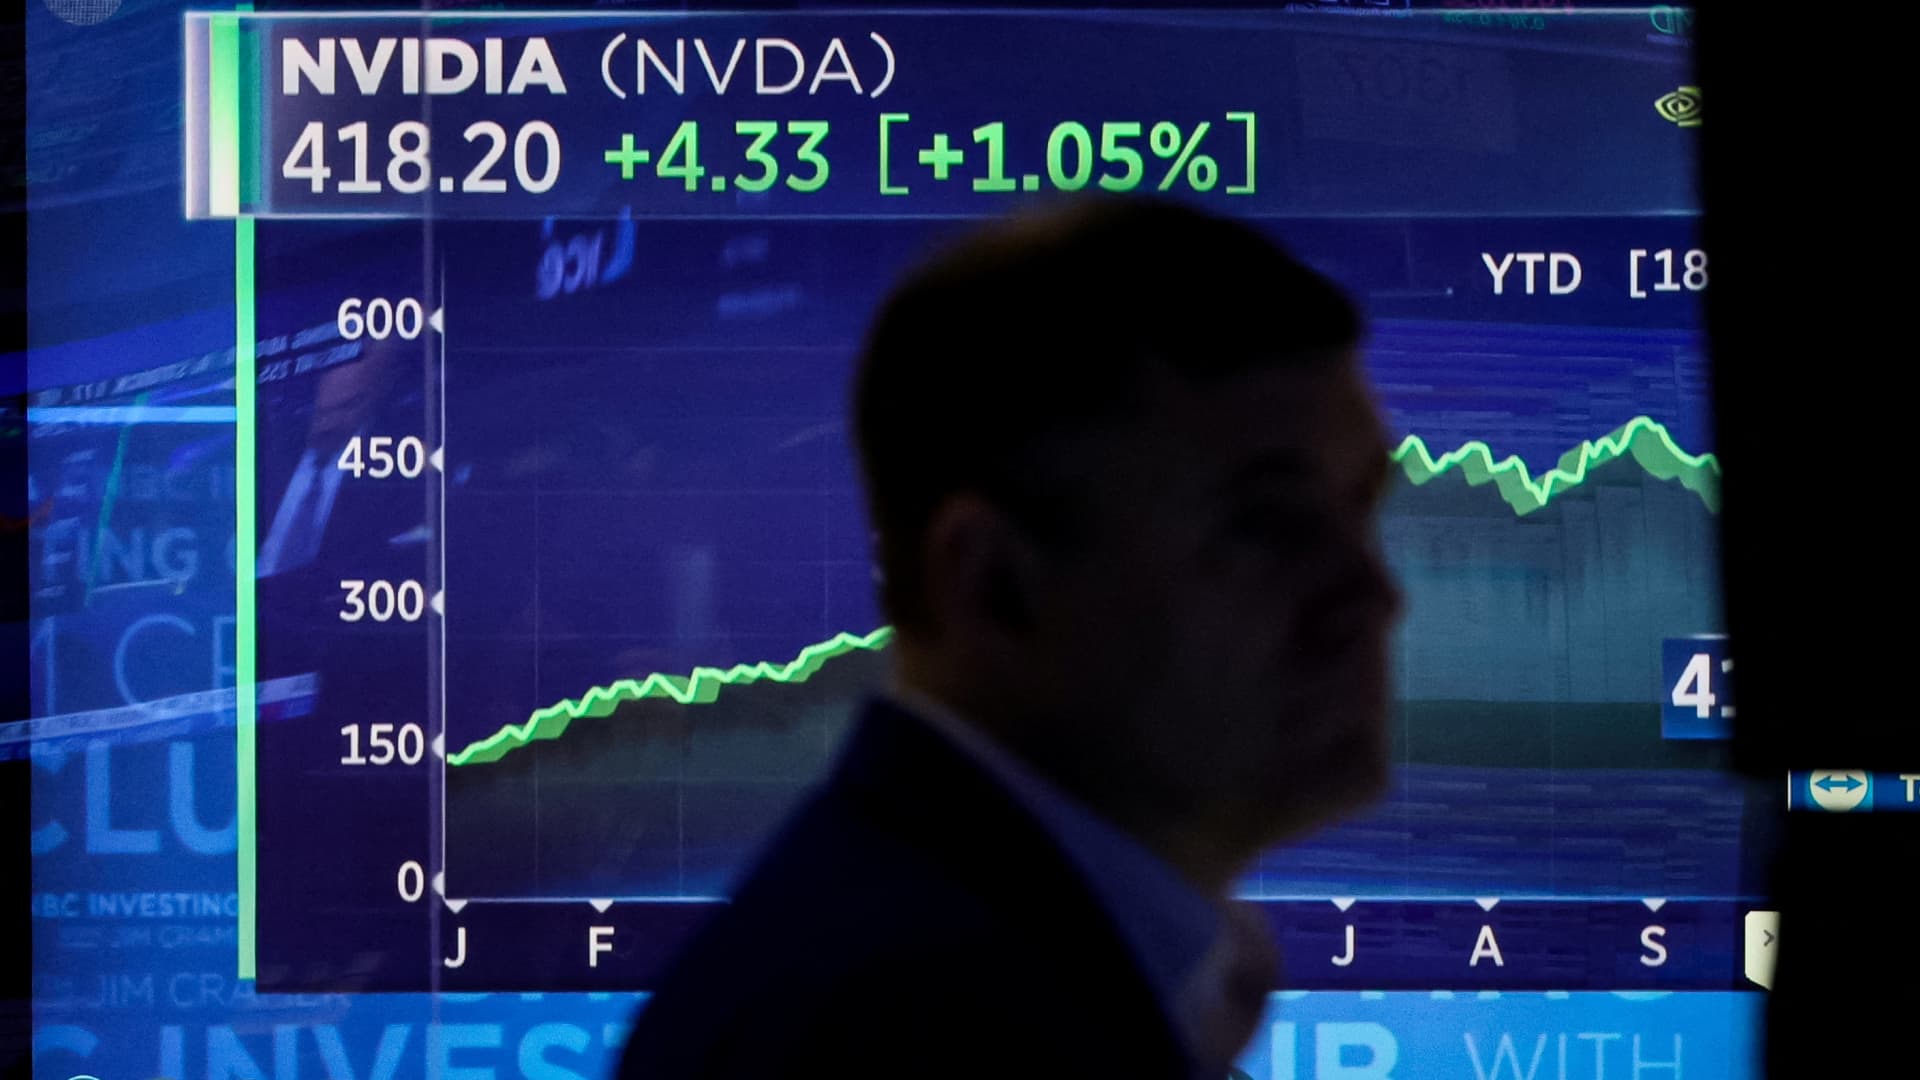 When Nvidia rises  these global stocks tend to rise too, history says [Video]